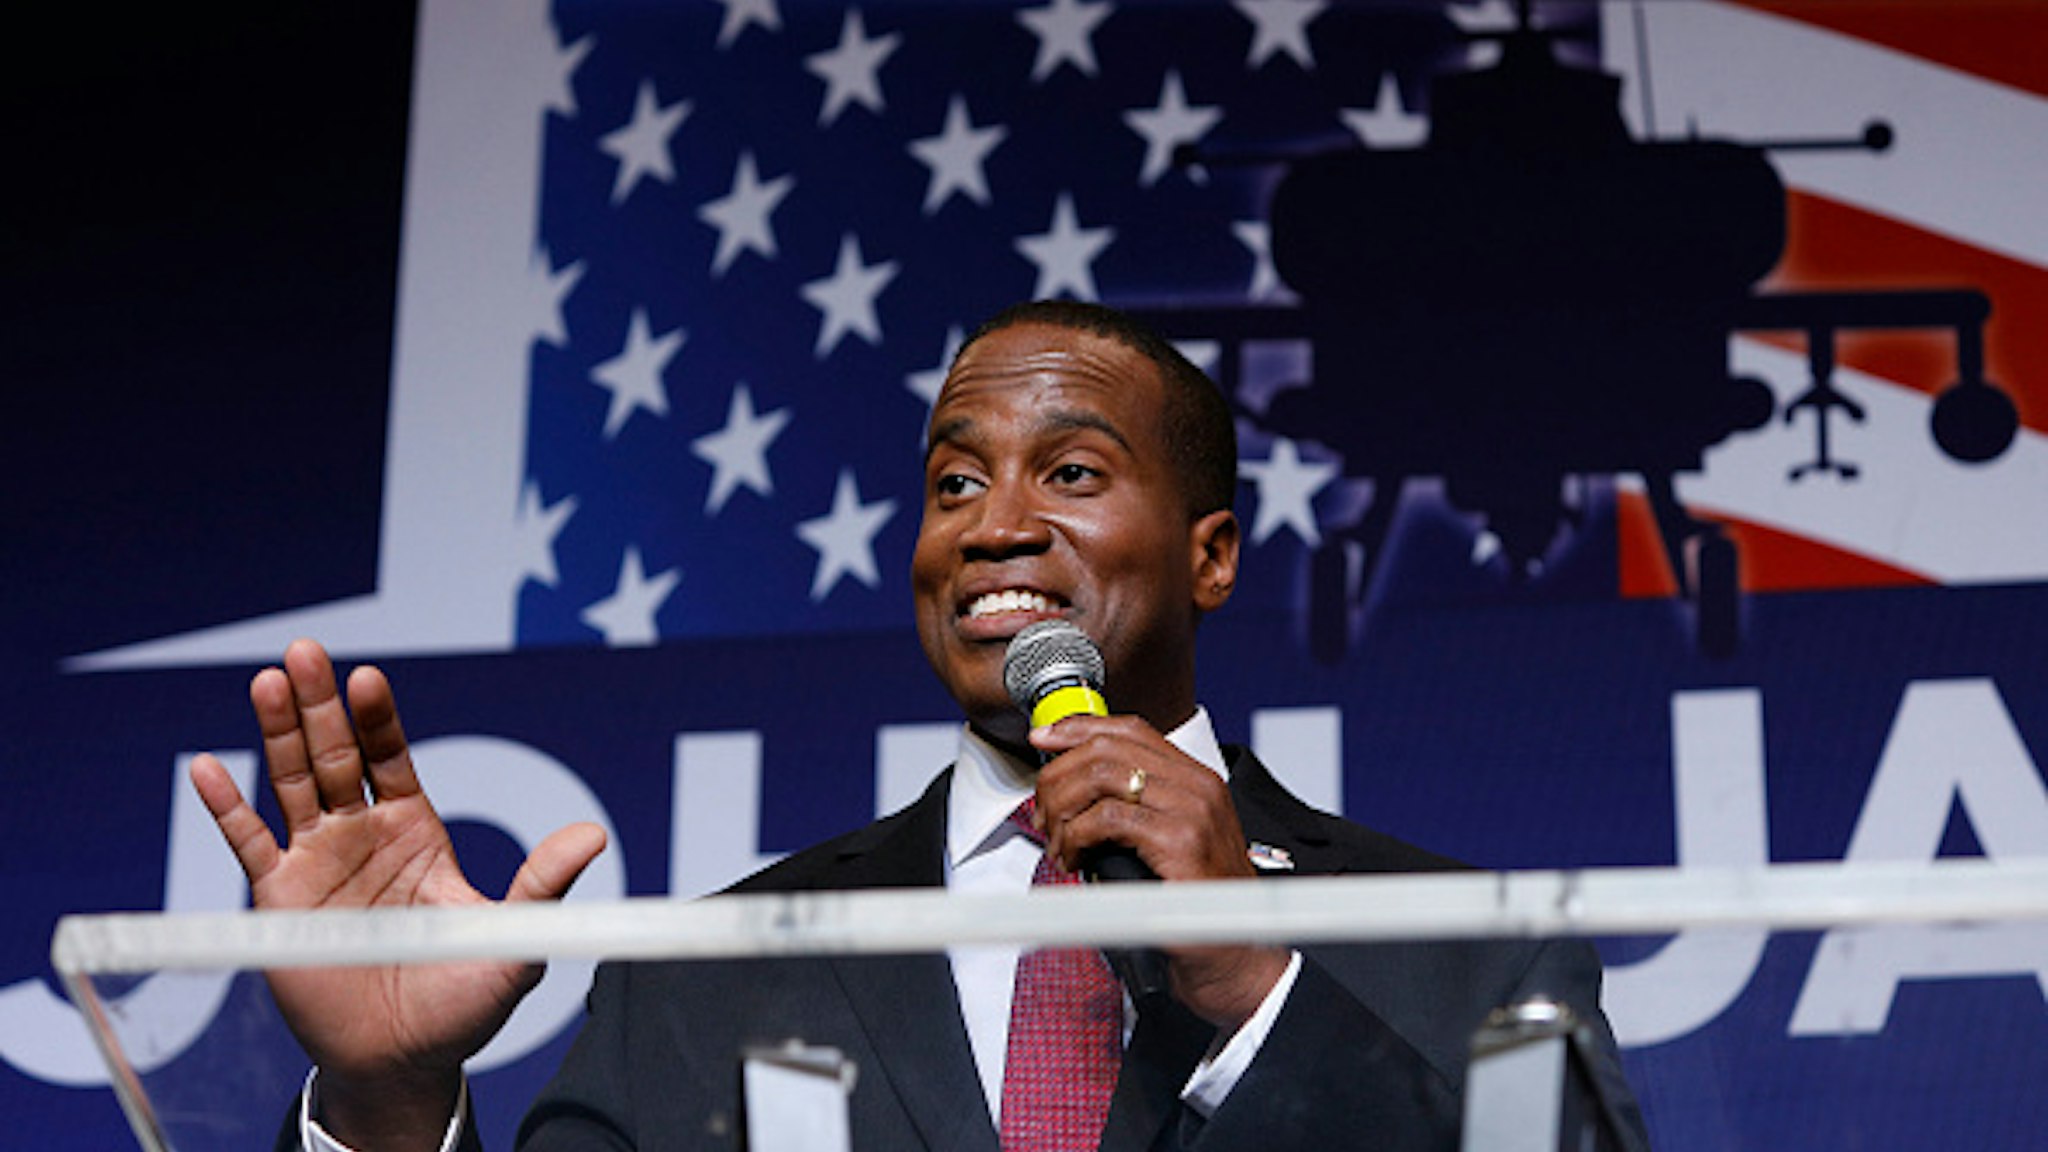 DETROIT, MI - AUGUST 7: John James, Michigan GOP Senate candidate, speaks at an election night event after winning his primary election at his business James Group International August 7th, 2018 in Detroit, Michigan. James, who has President Donald Trump's endorsement, will face Democrat incumbent Senator Debbie Stabenow (D-MI) in November.